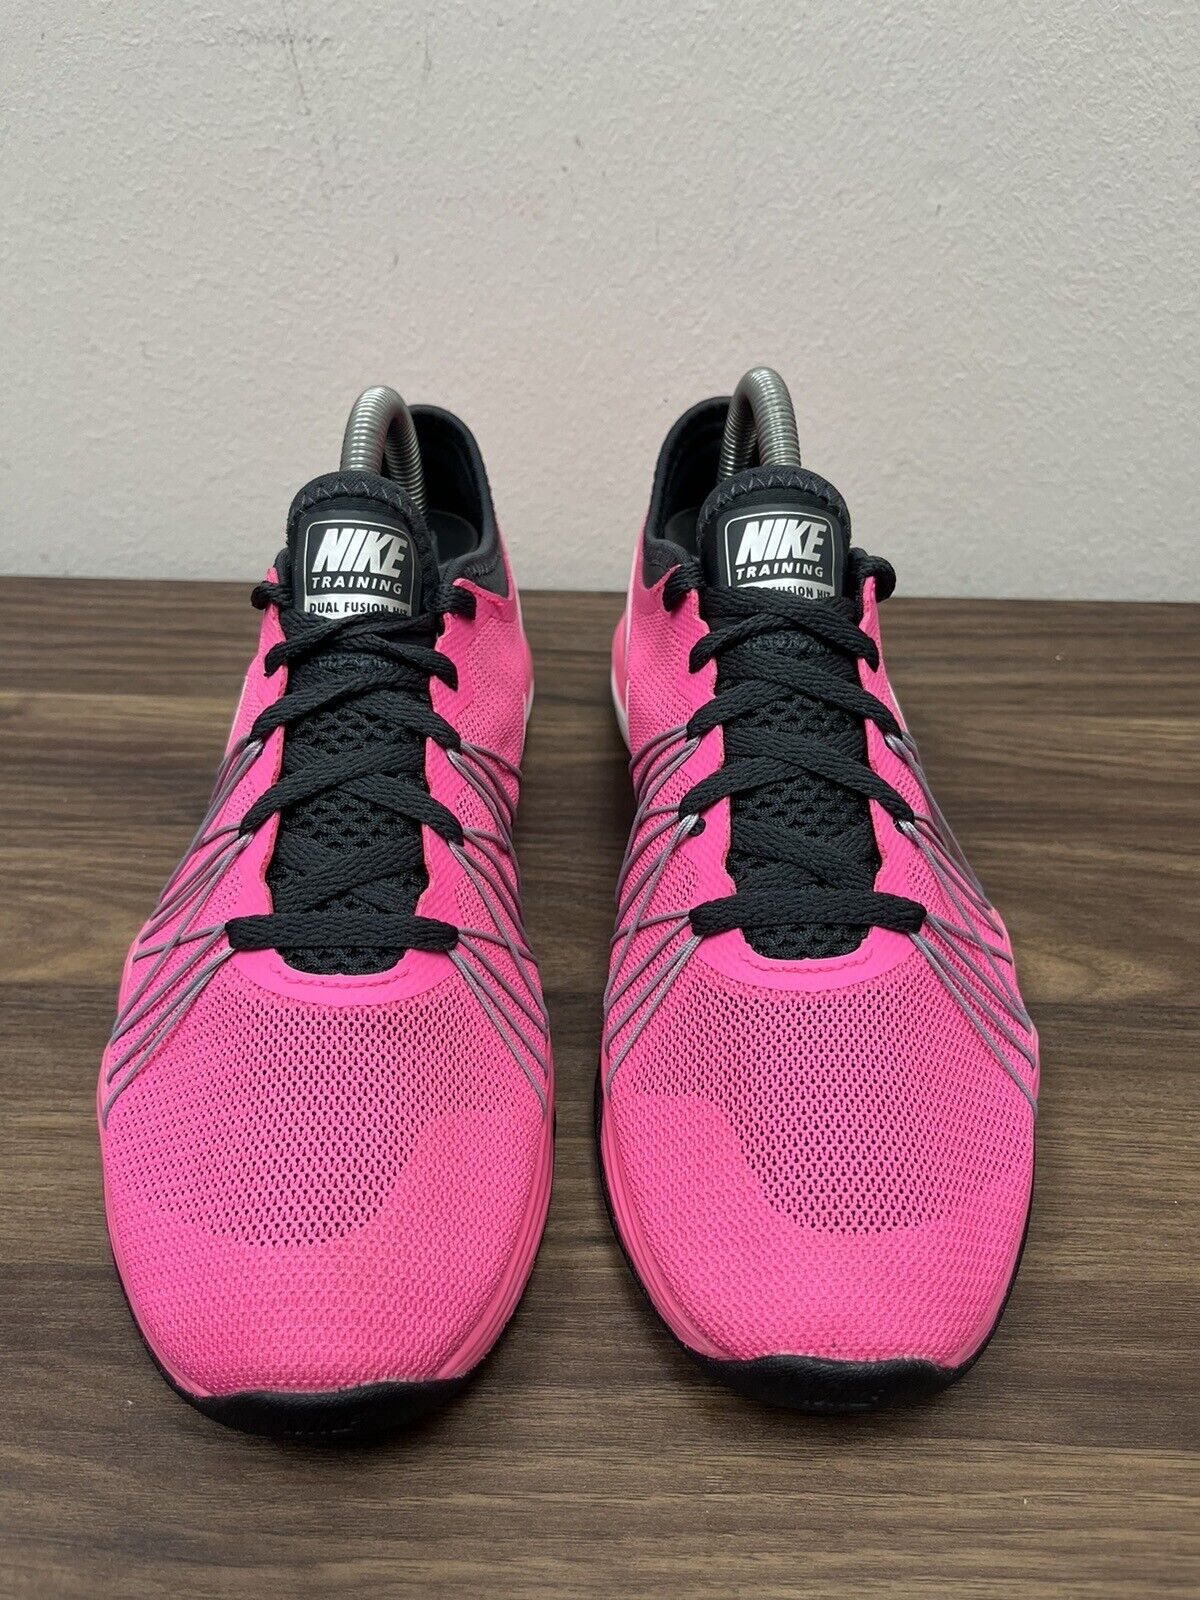 Nike Dual Fusion Hit Pink Black Womens US Size 7.5  844674-600 Running Shoes